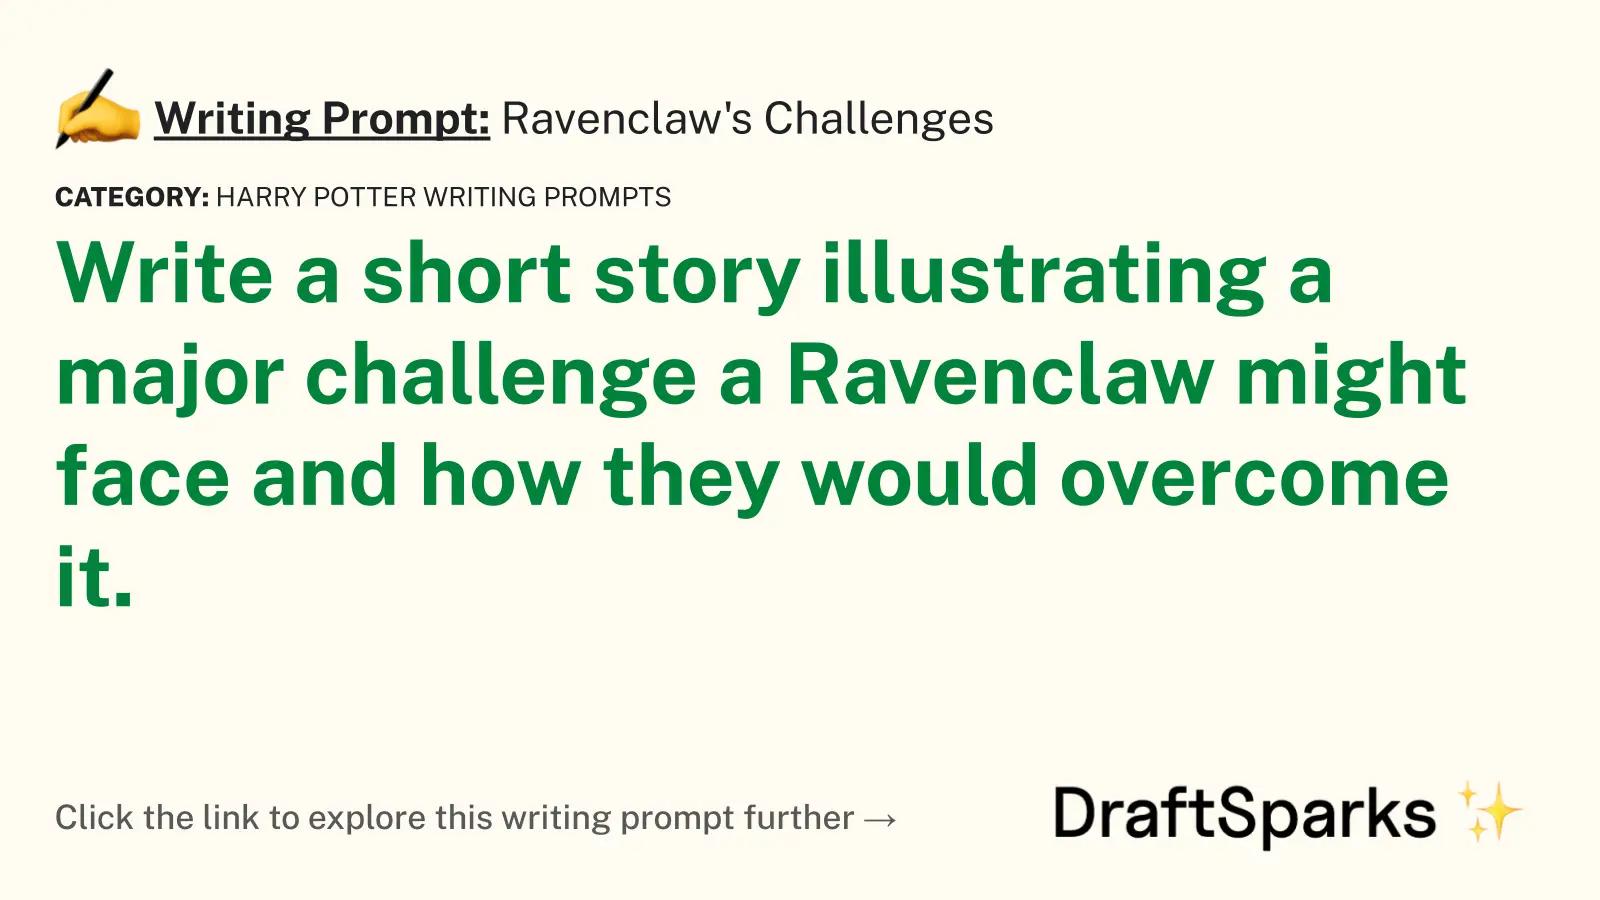 Ravenclaw’s Challenges